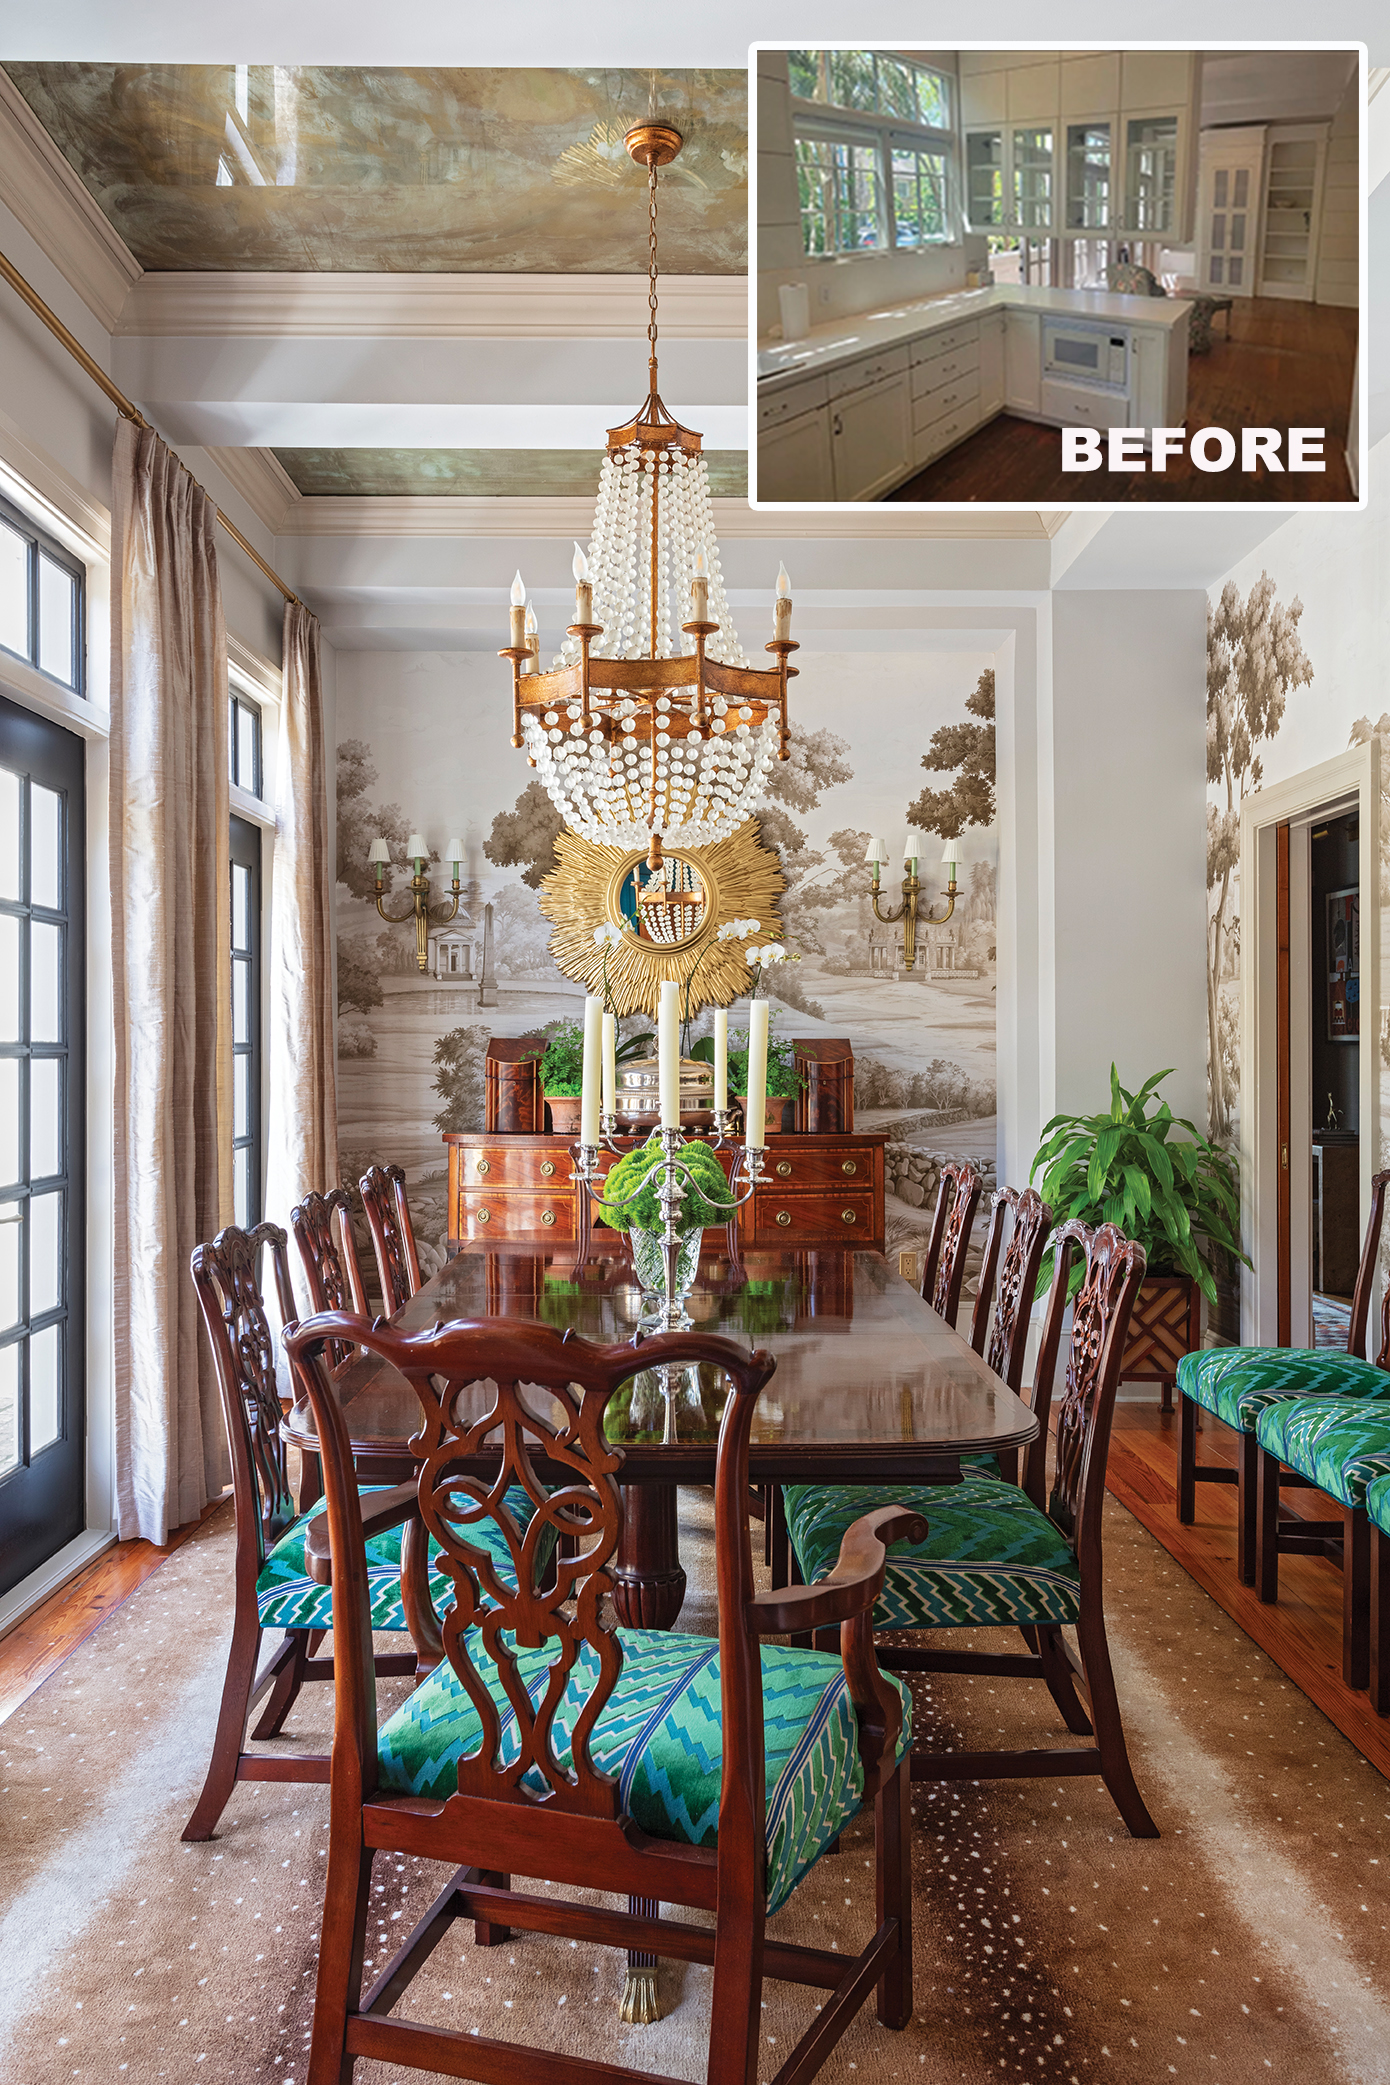 The Hardees swapped the kitchen and dining rooms. Now, with floor-to-ceiling French doors, the new space is flooded with light, showing off the Paul Montgomery mural wallpaper. The chairs were re-covered in Schumacher velvet for a pop of green and blue.